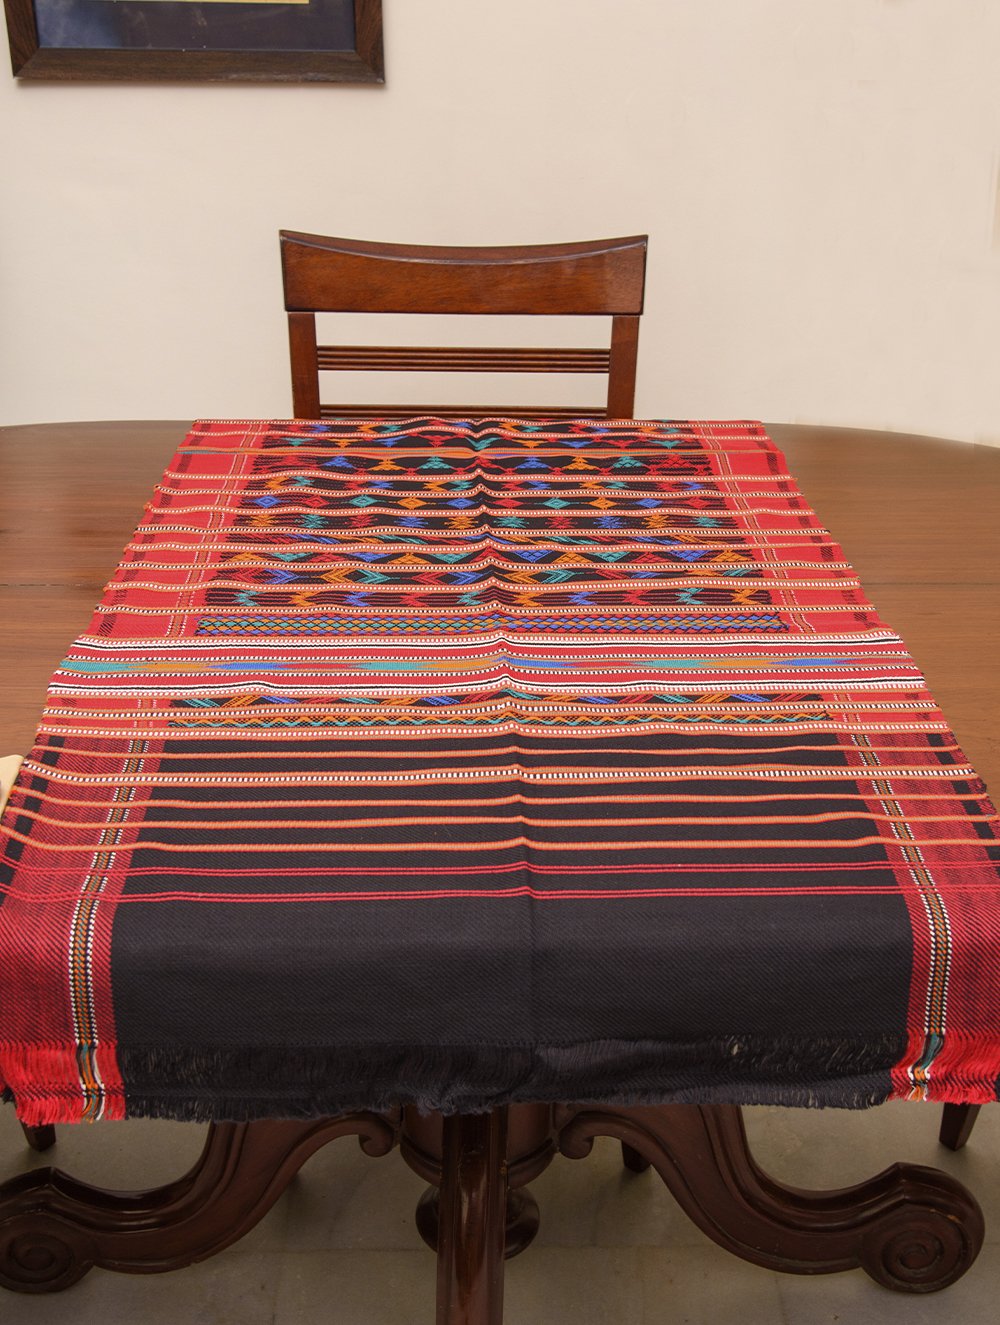 Load image into Gallery viewer, Kashida Pattu Woven Table Runner - Large 